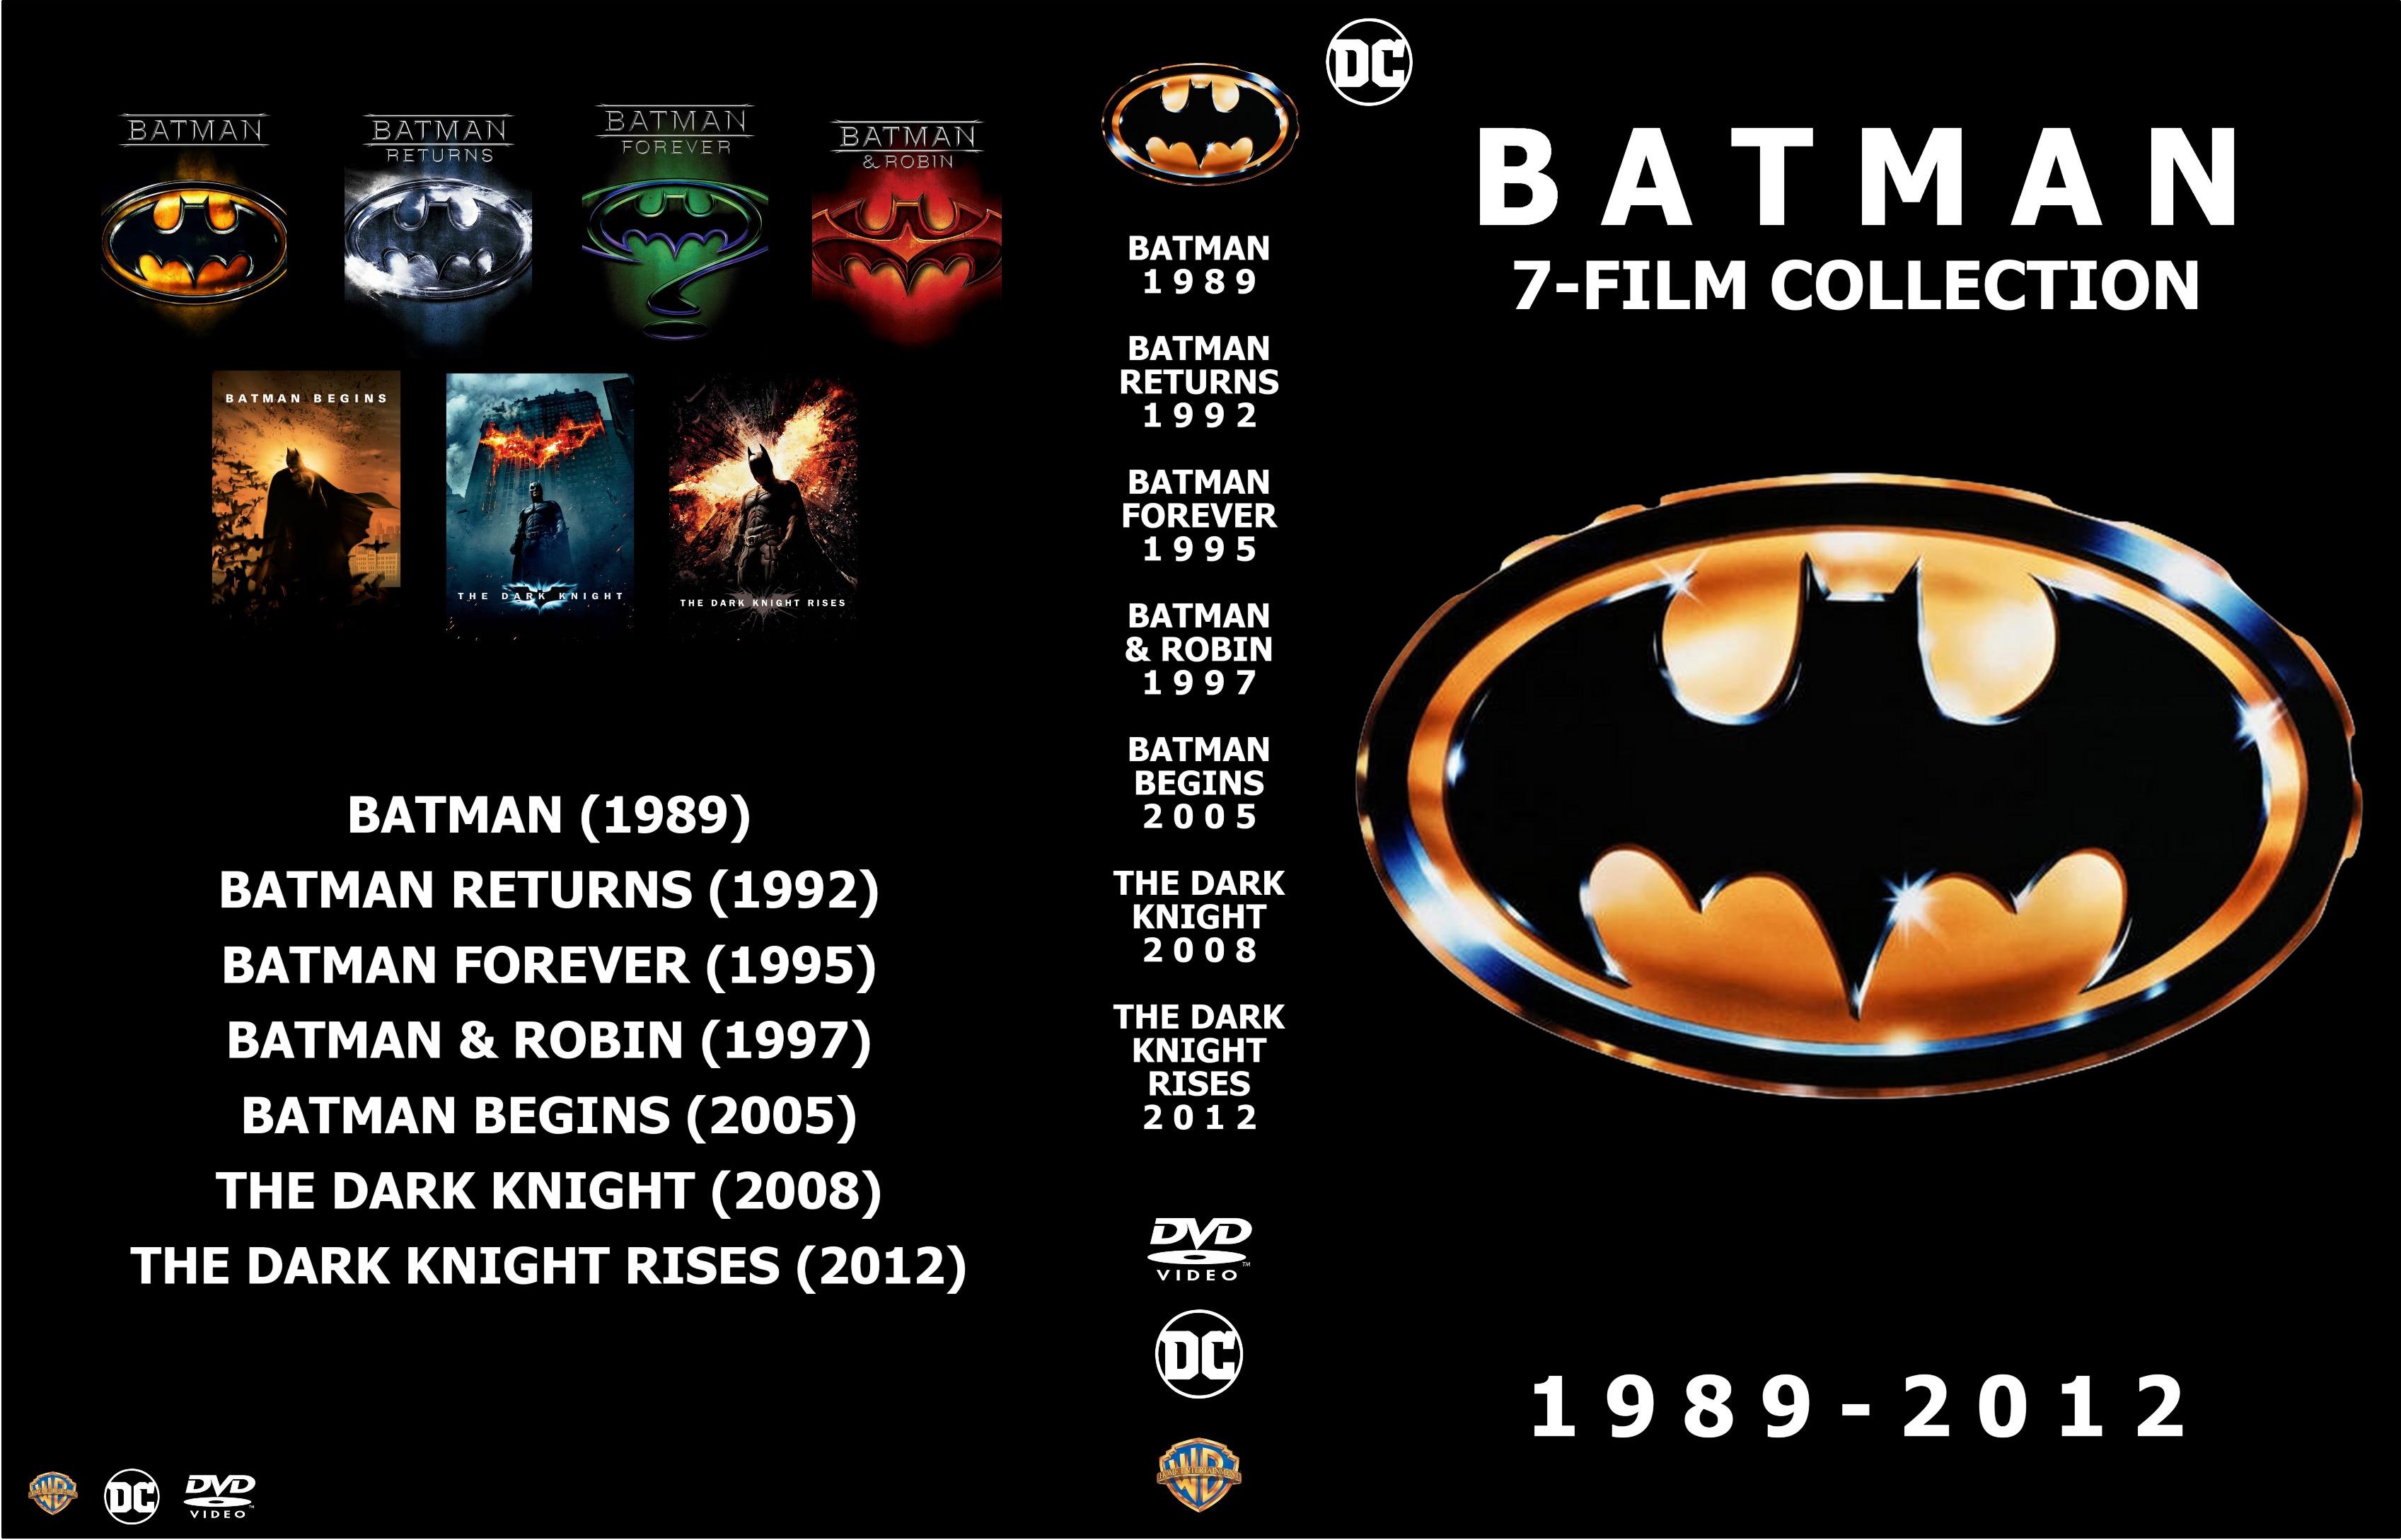 Batman Movie Collection DVD Cover by kylerwyler1 on DeviantArt